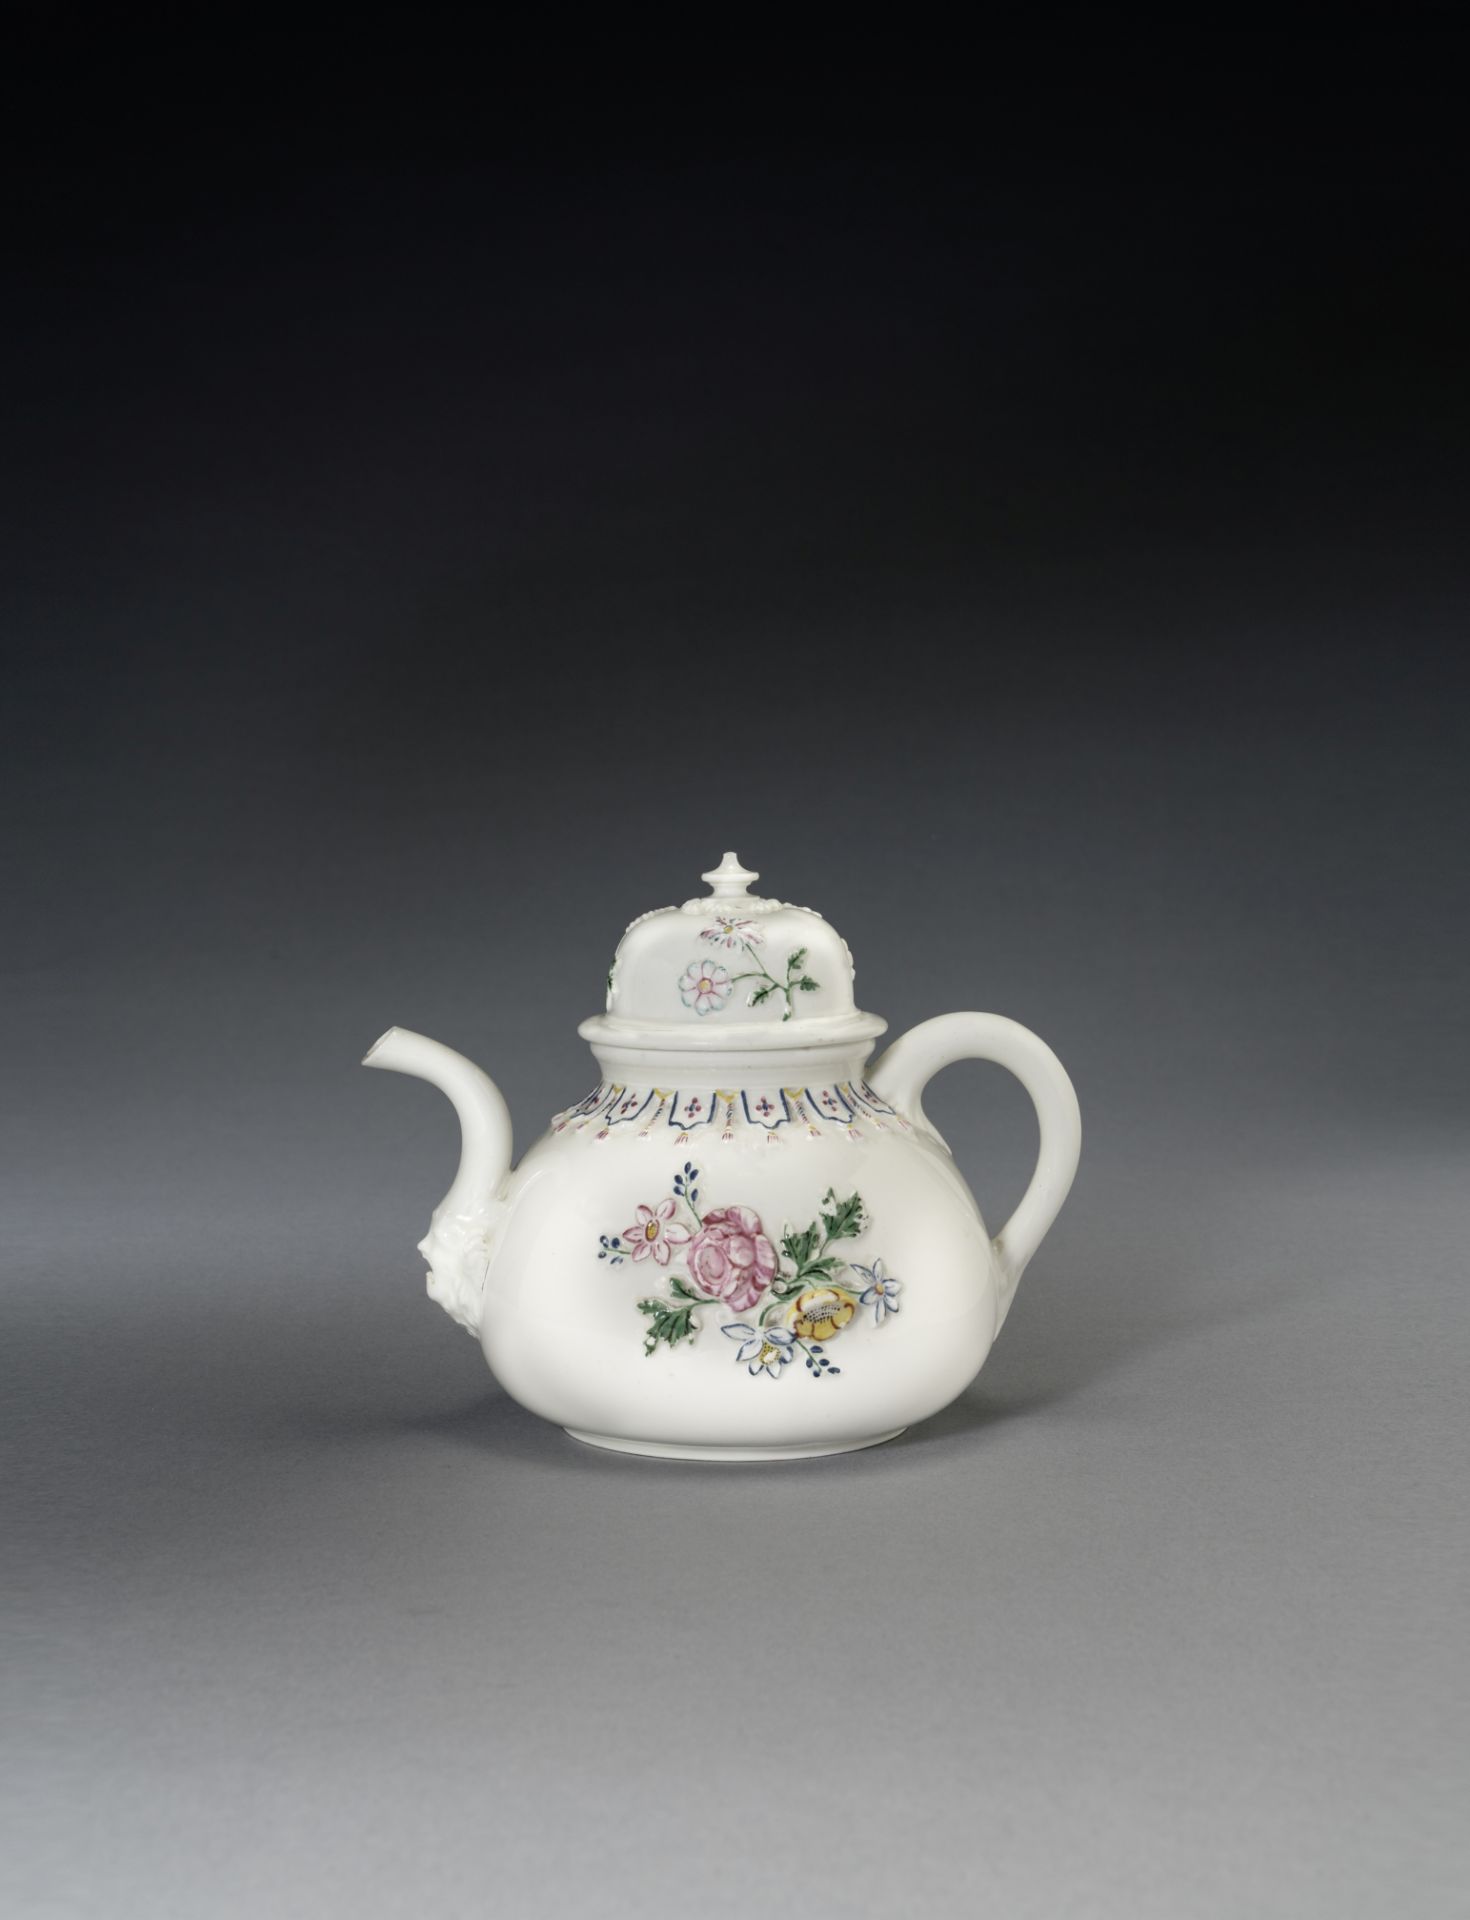 An early Meissen teapot and cover, circa 1715-20